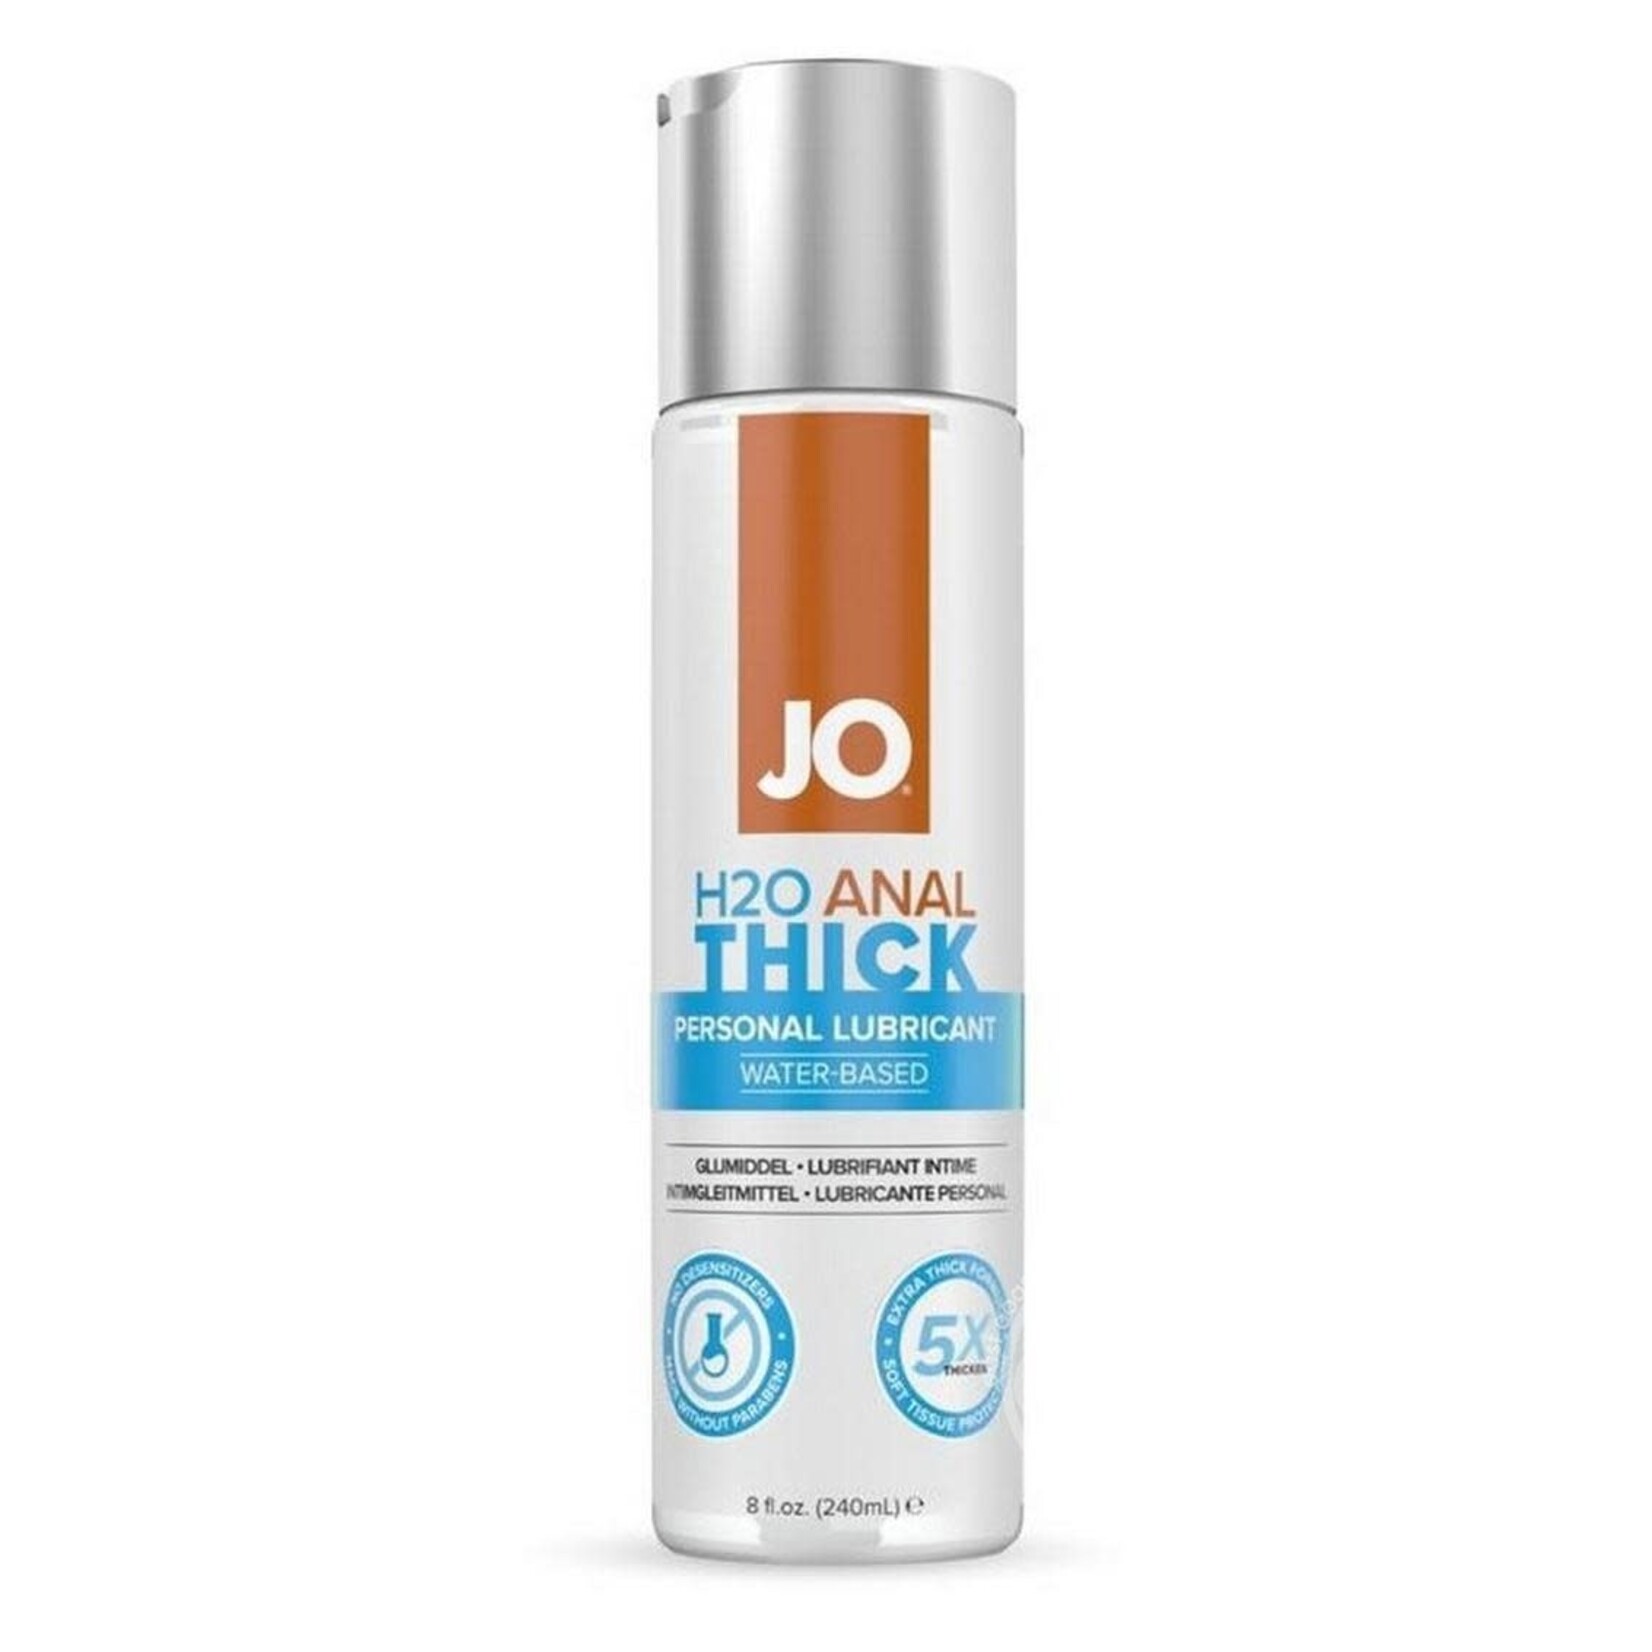 JO Anal Water Based Thick Lubricant 8oz.